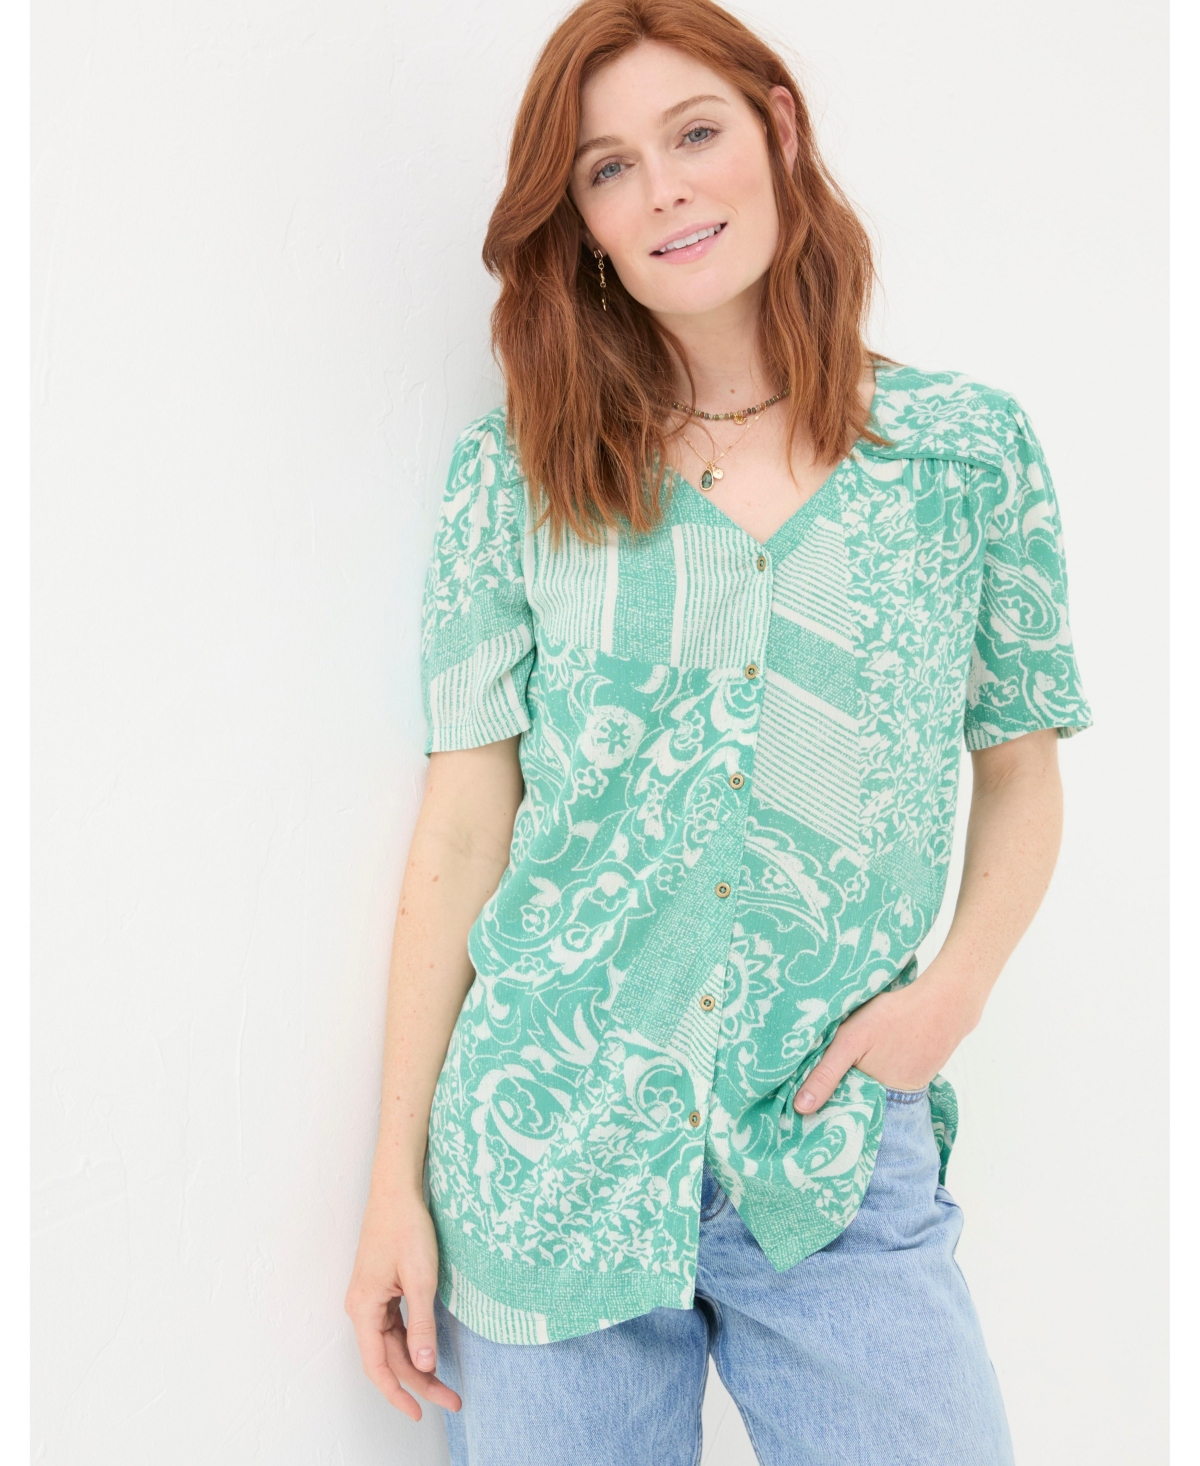 Women's Cassidy Patched Paisley Tunic - Teal blue